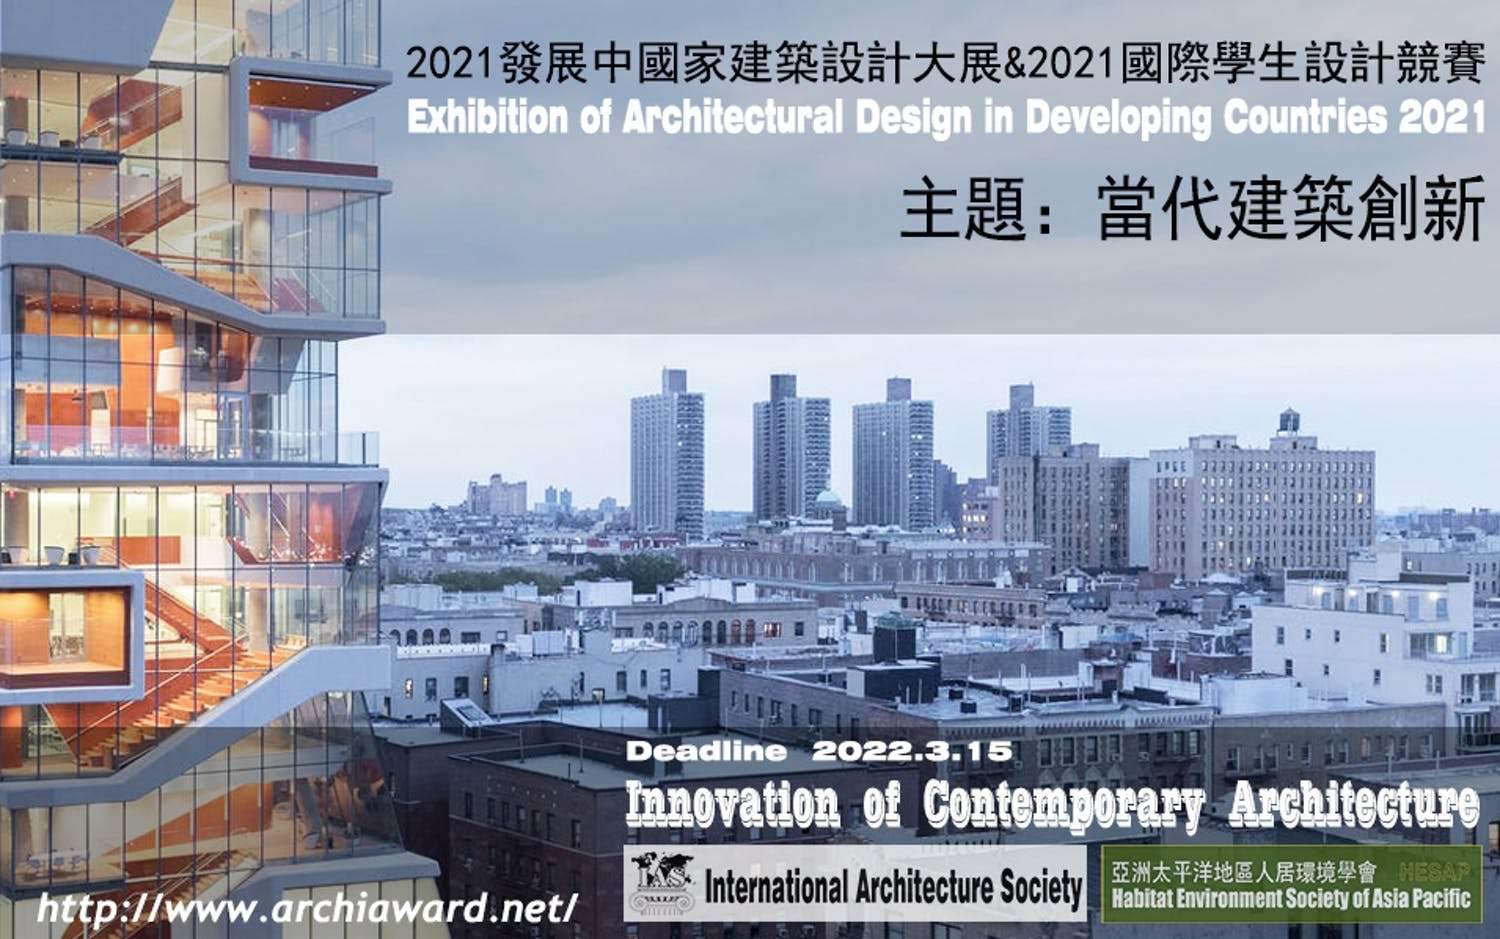 Exhibition of Architectural Design in Developing Countries 2021